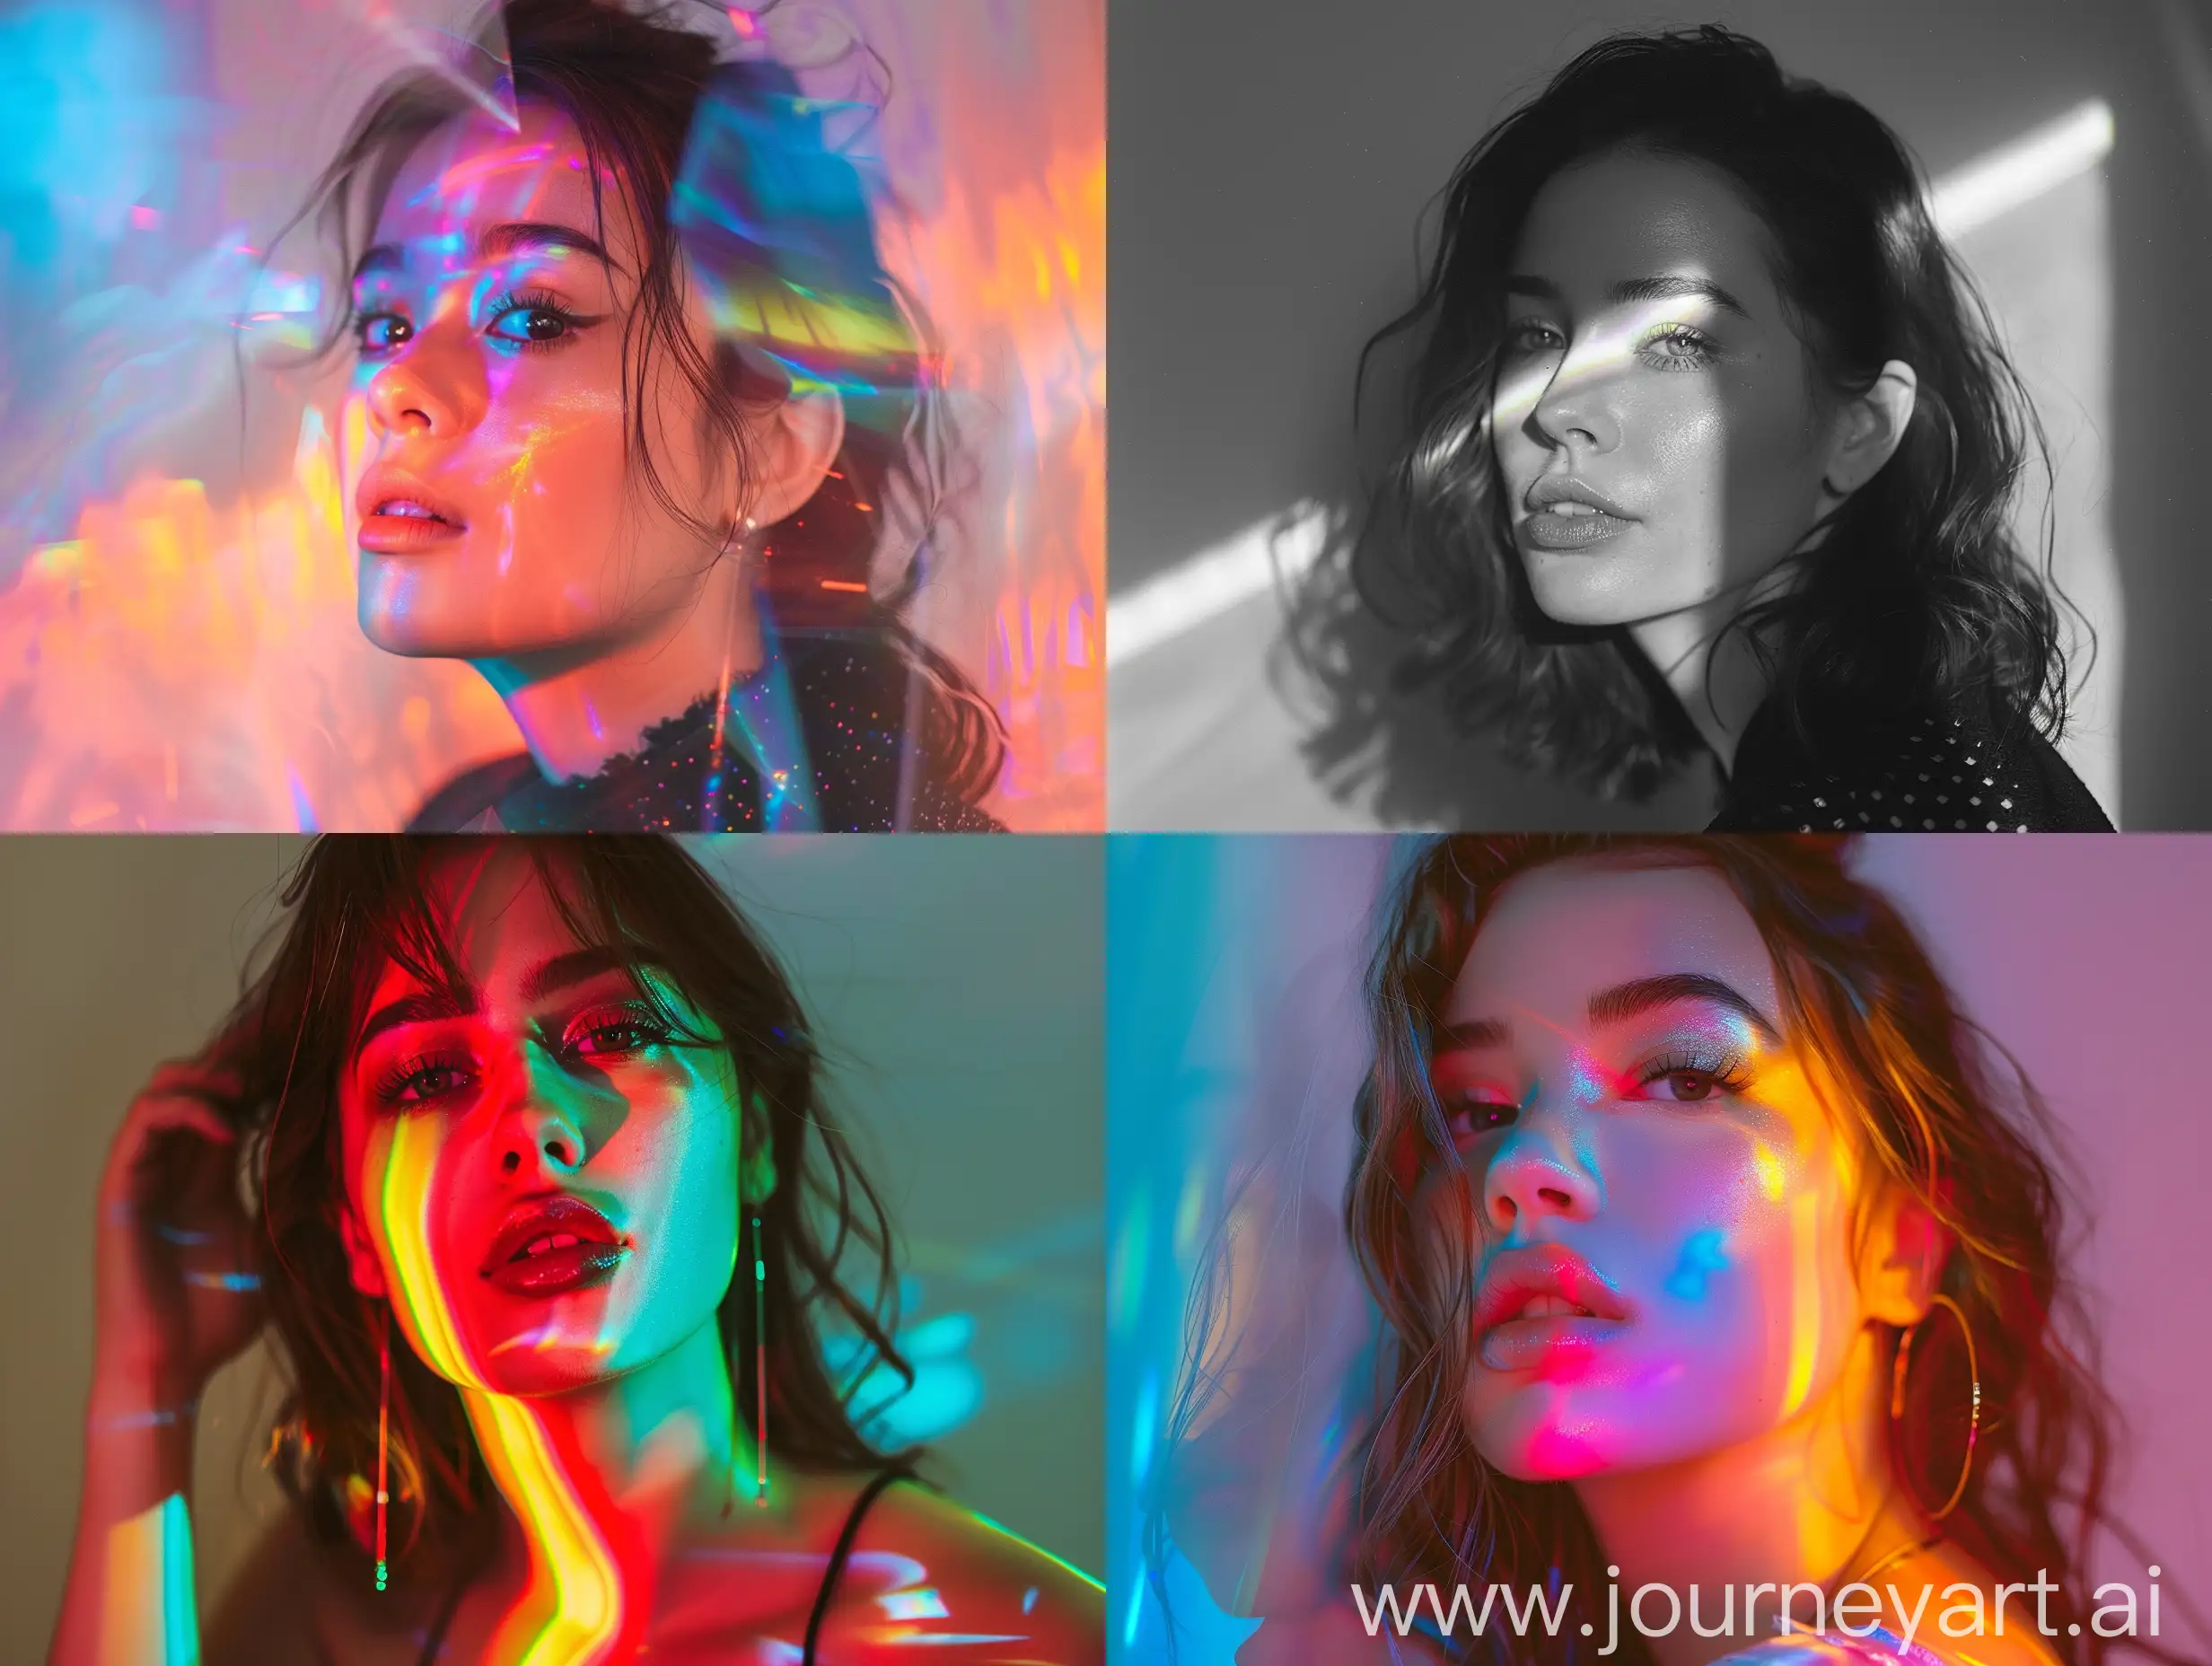 Portrait of a beautiful woman using prism photography